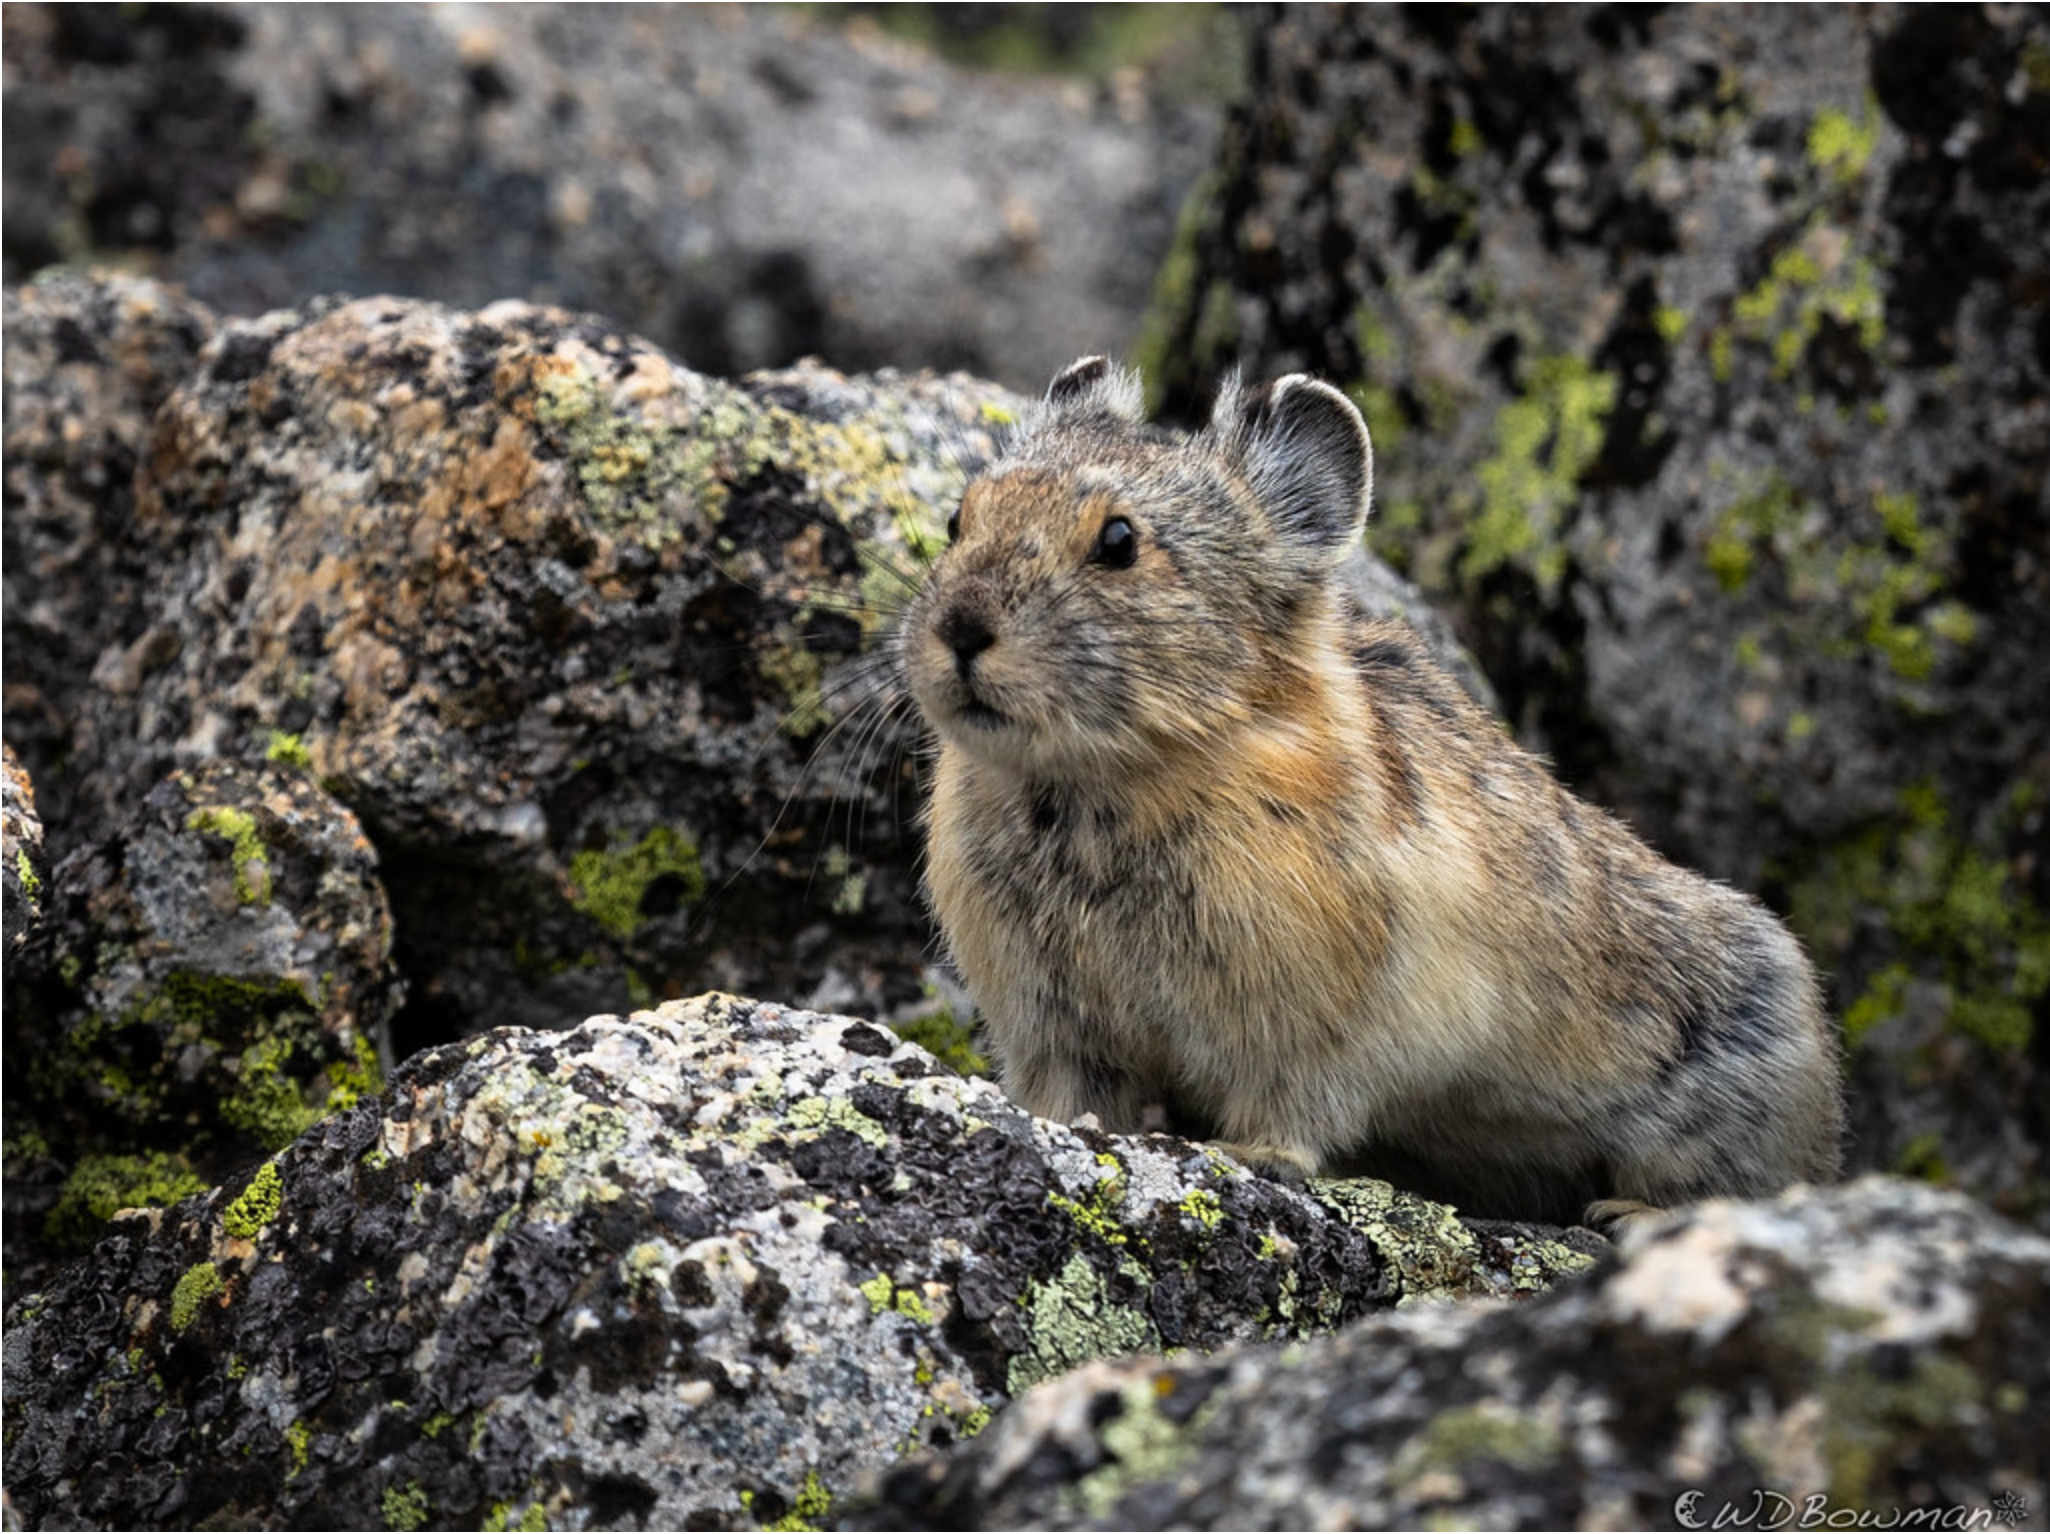 Pika enthusiasts unite under a common theme - LTER